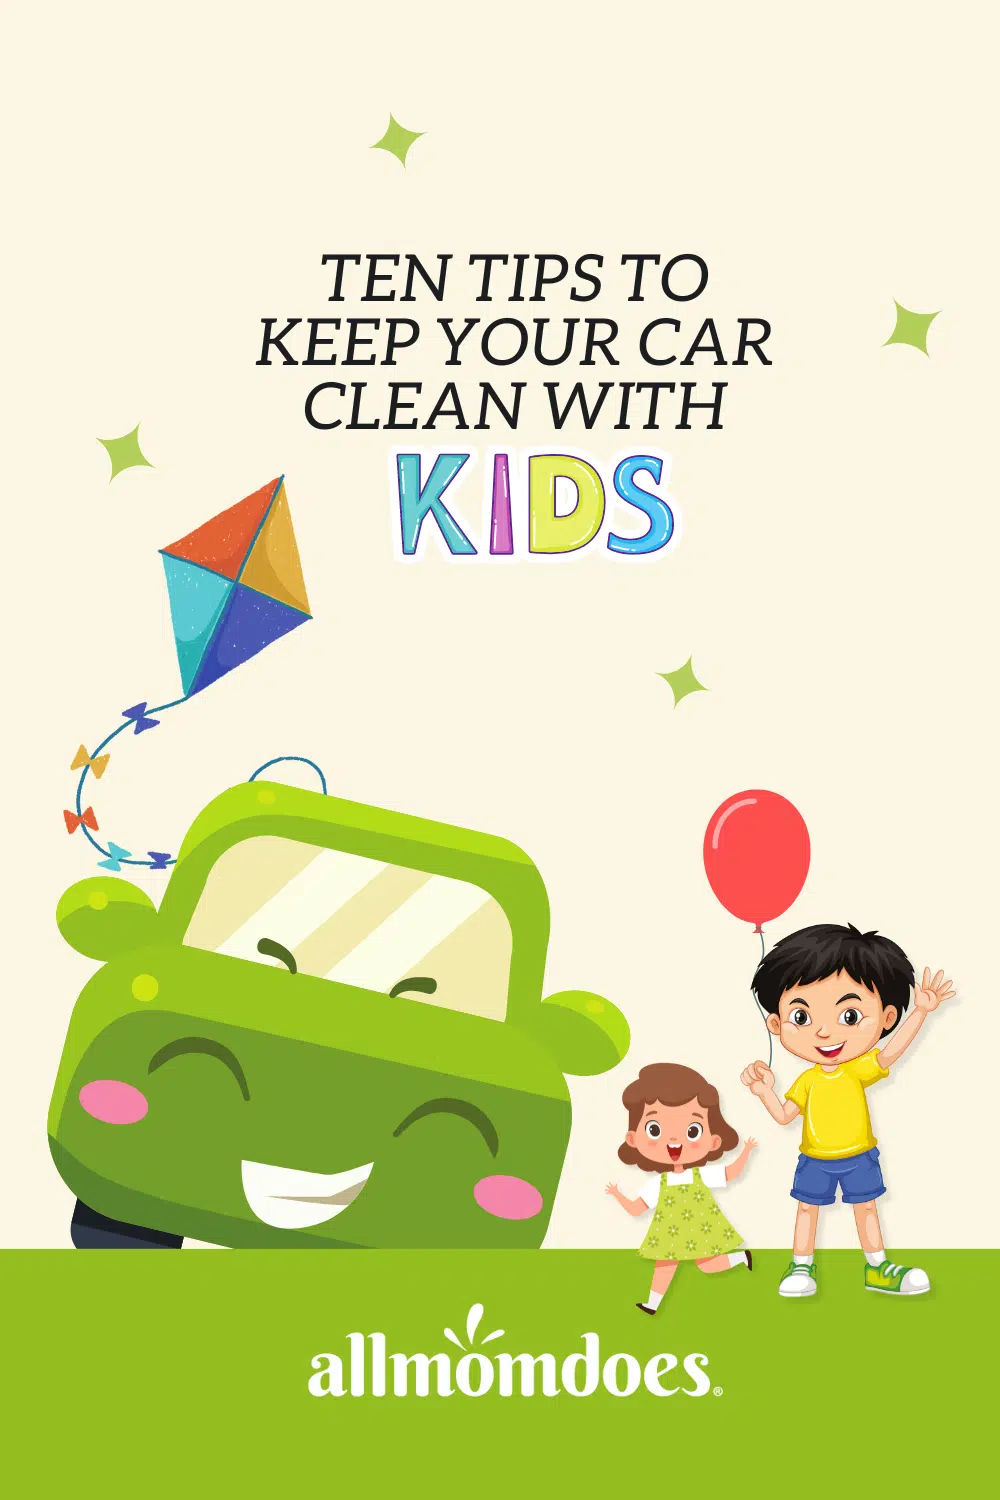 Keeping the Car Clean with Kids